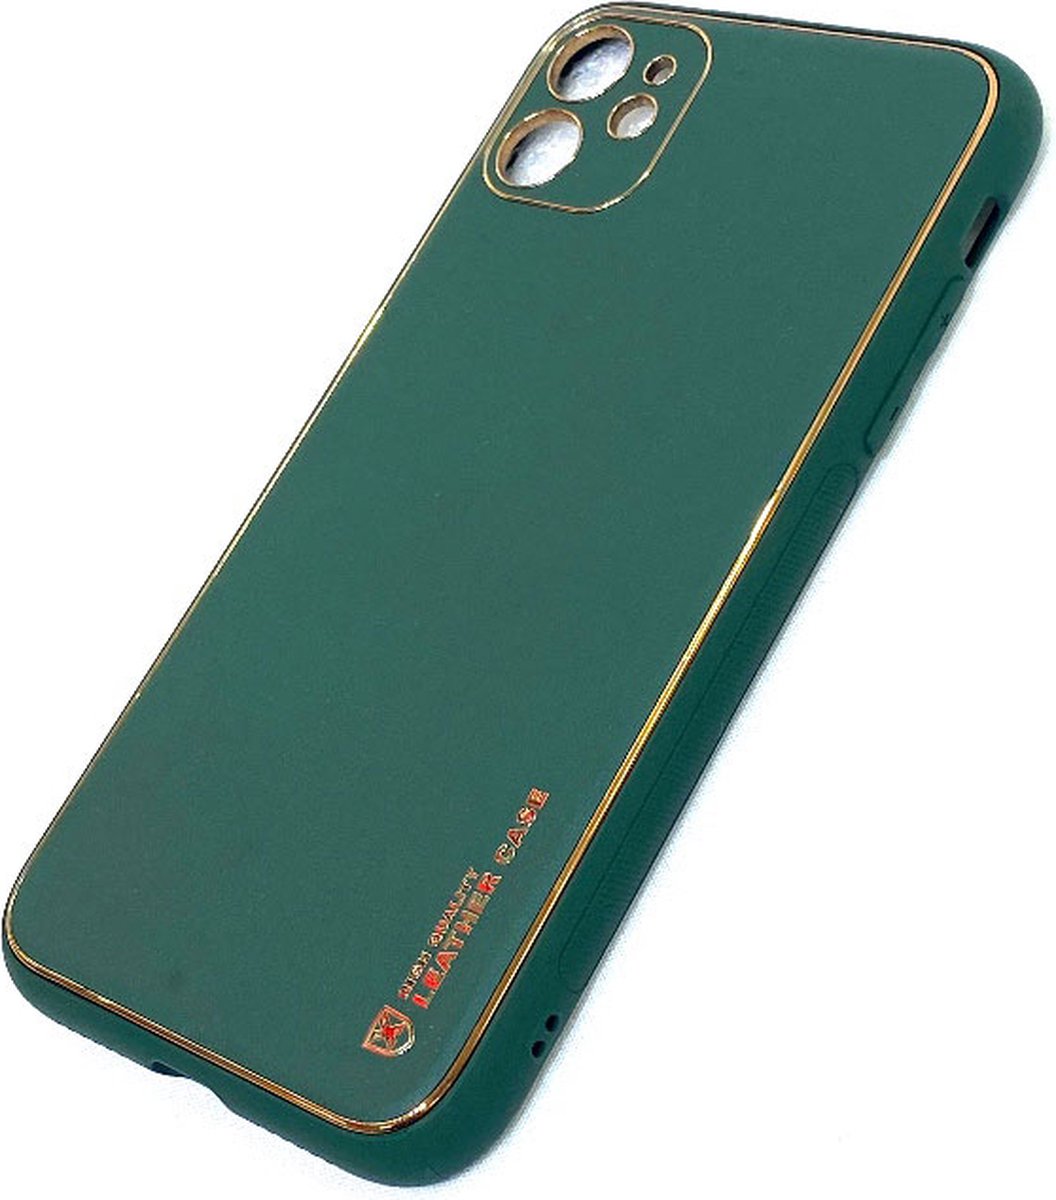 JPM Iphone 12 |Canary Series | Green Color